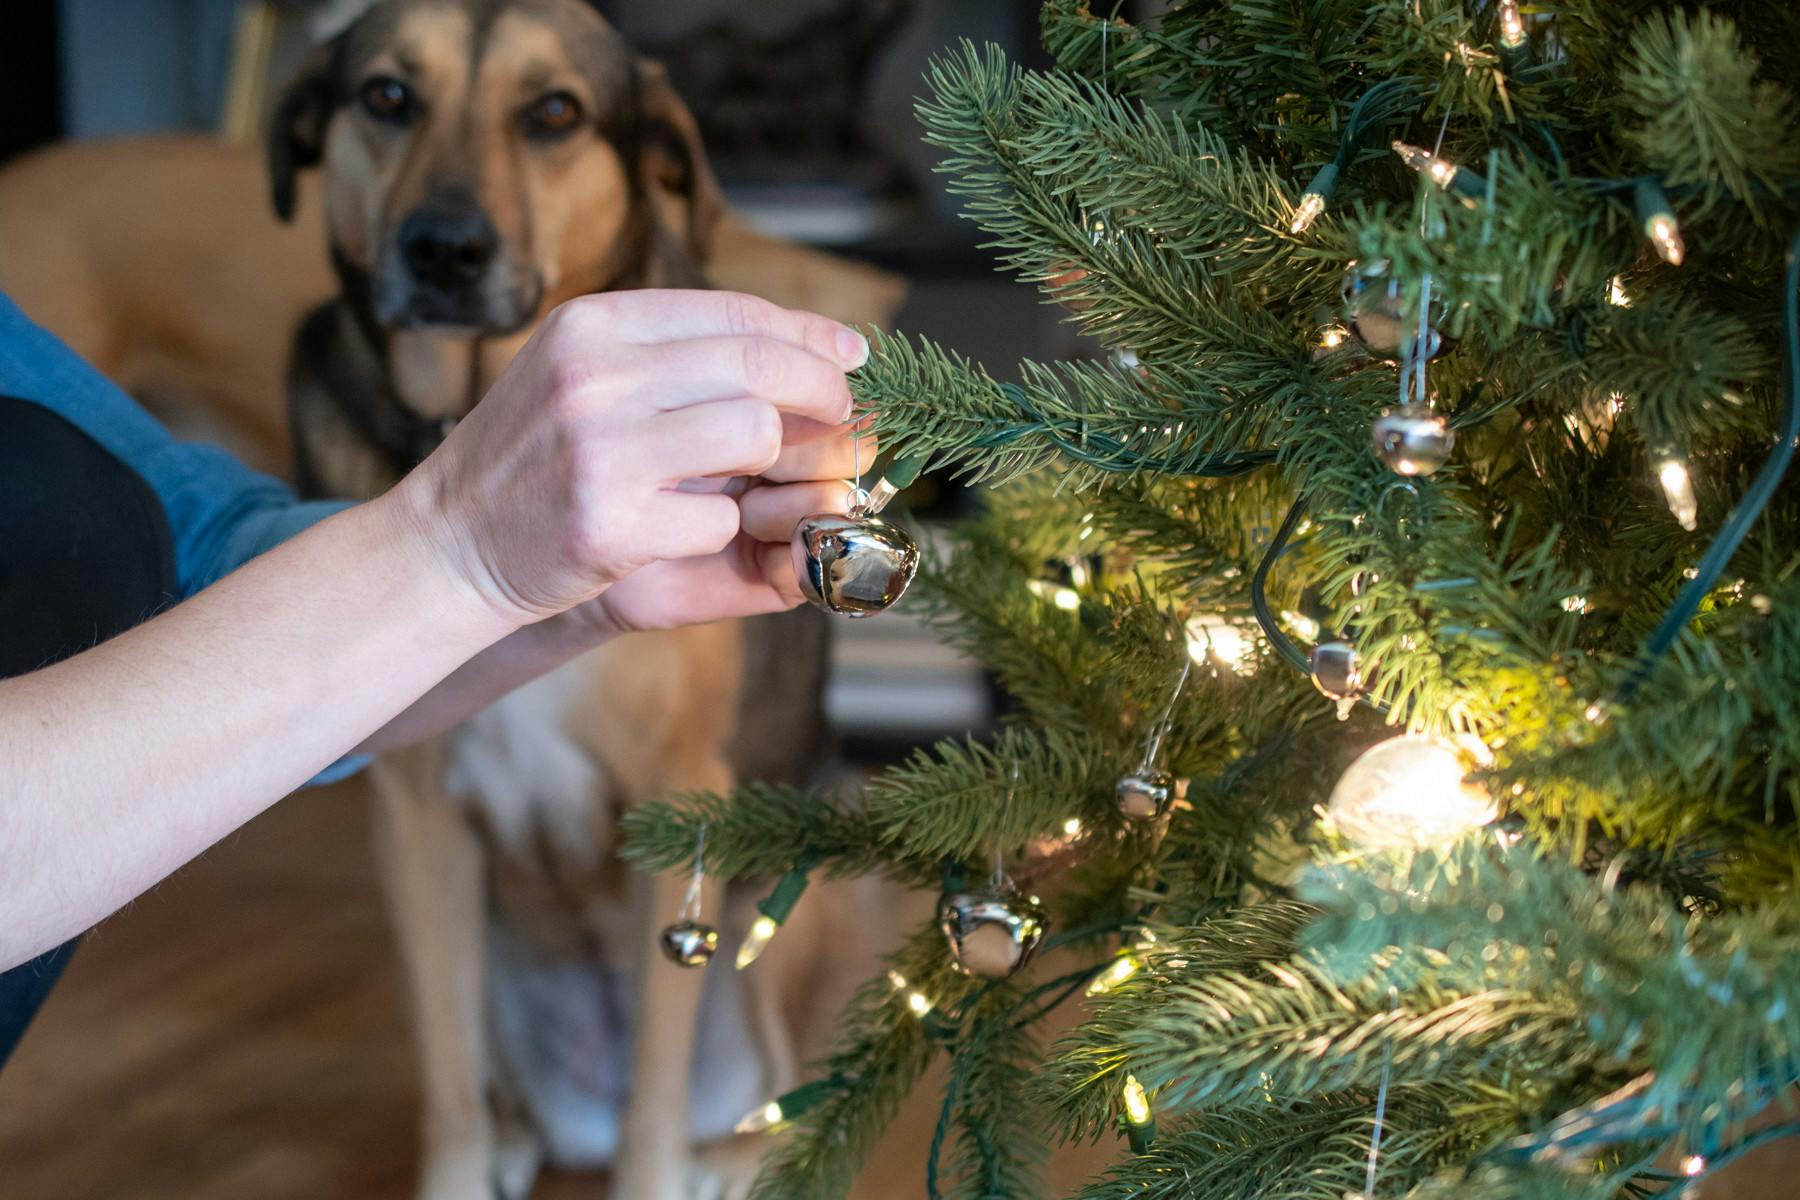 A person hanging bells on bottom branches of a Christmas tree with a dog in the background.